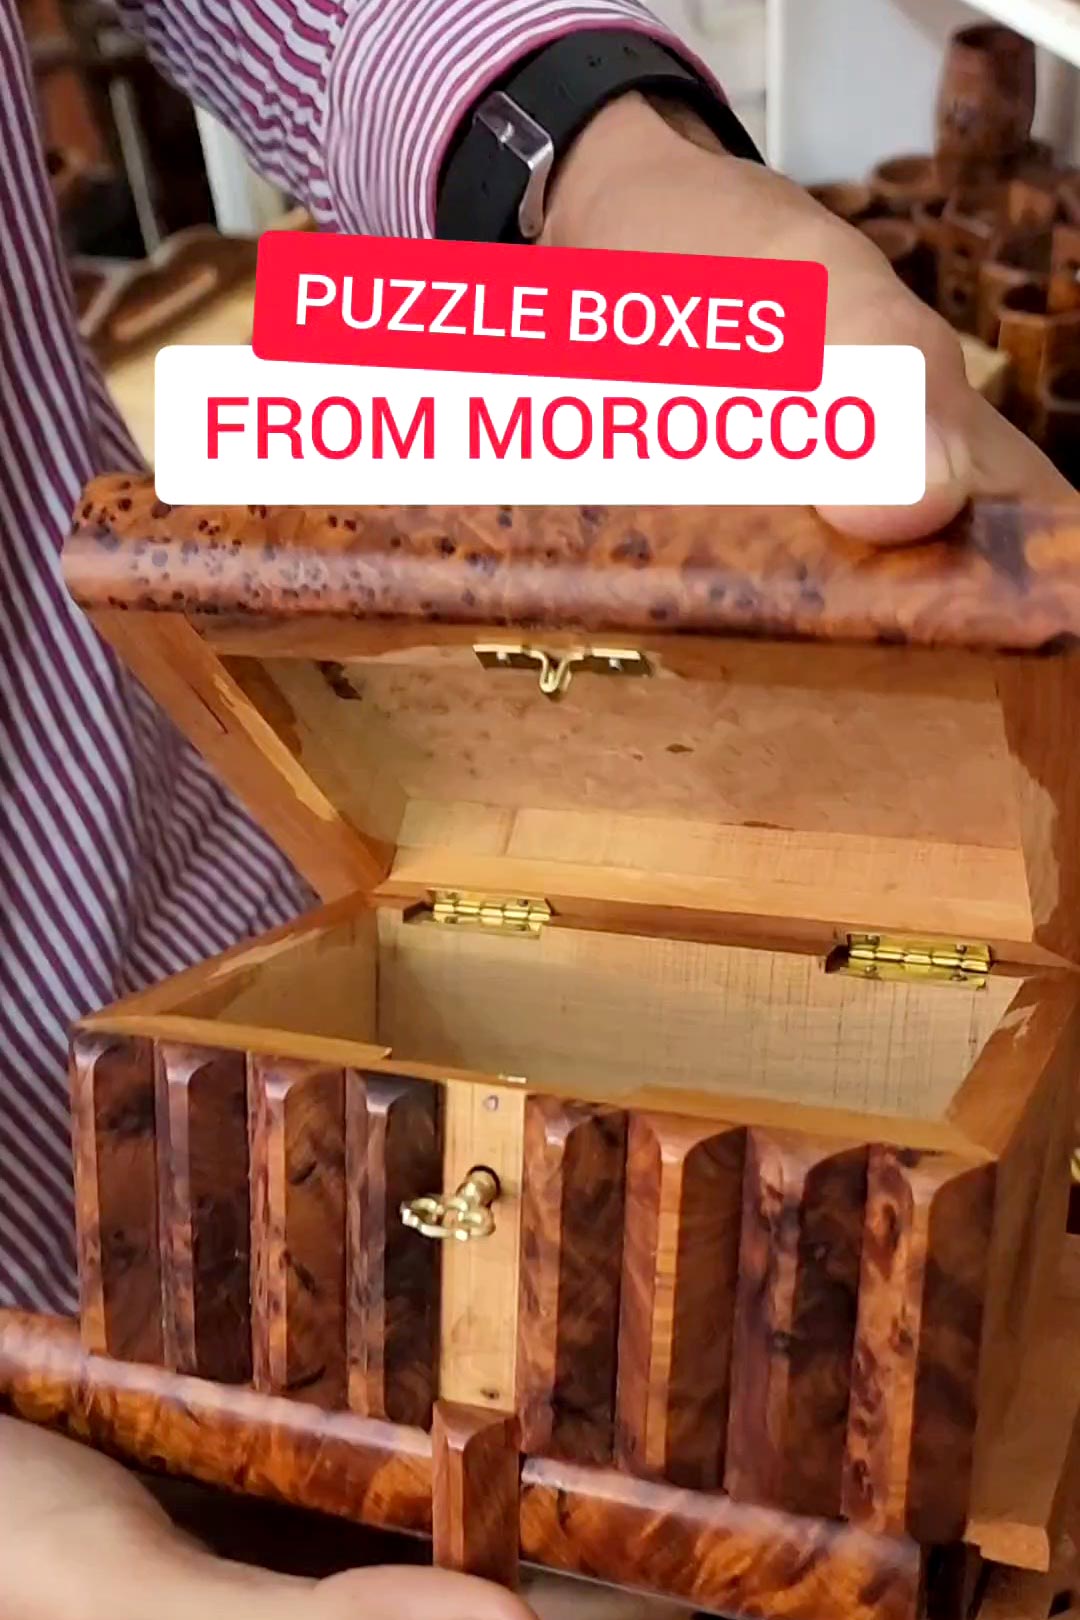 Puzzles Boxes from Morocco!